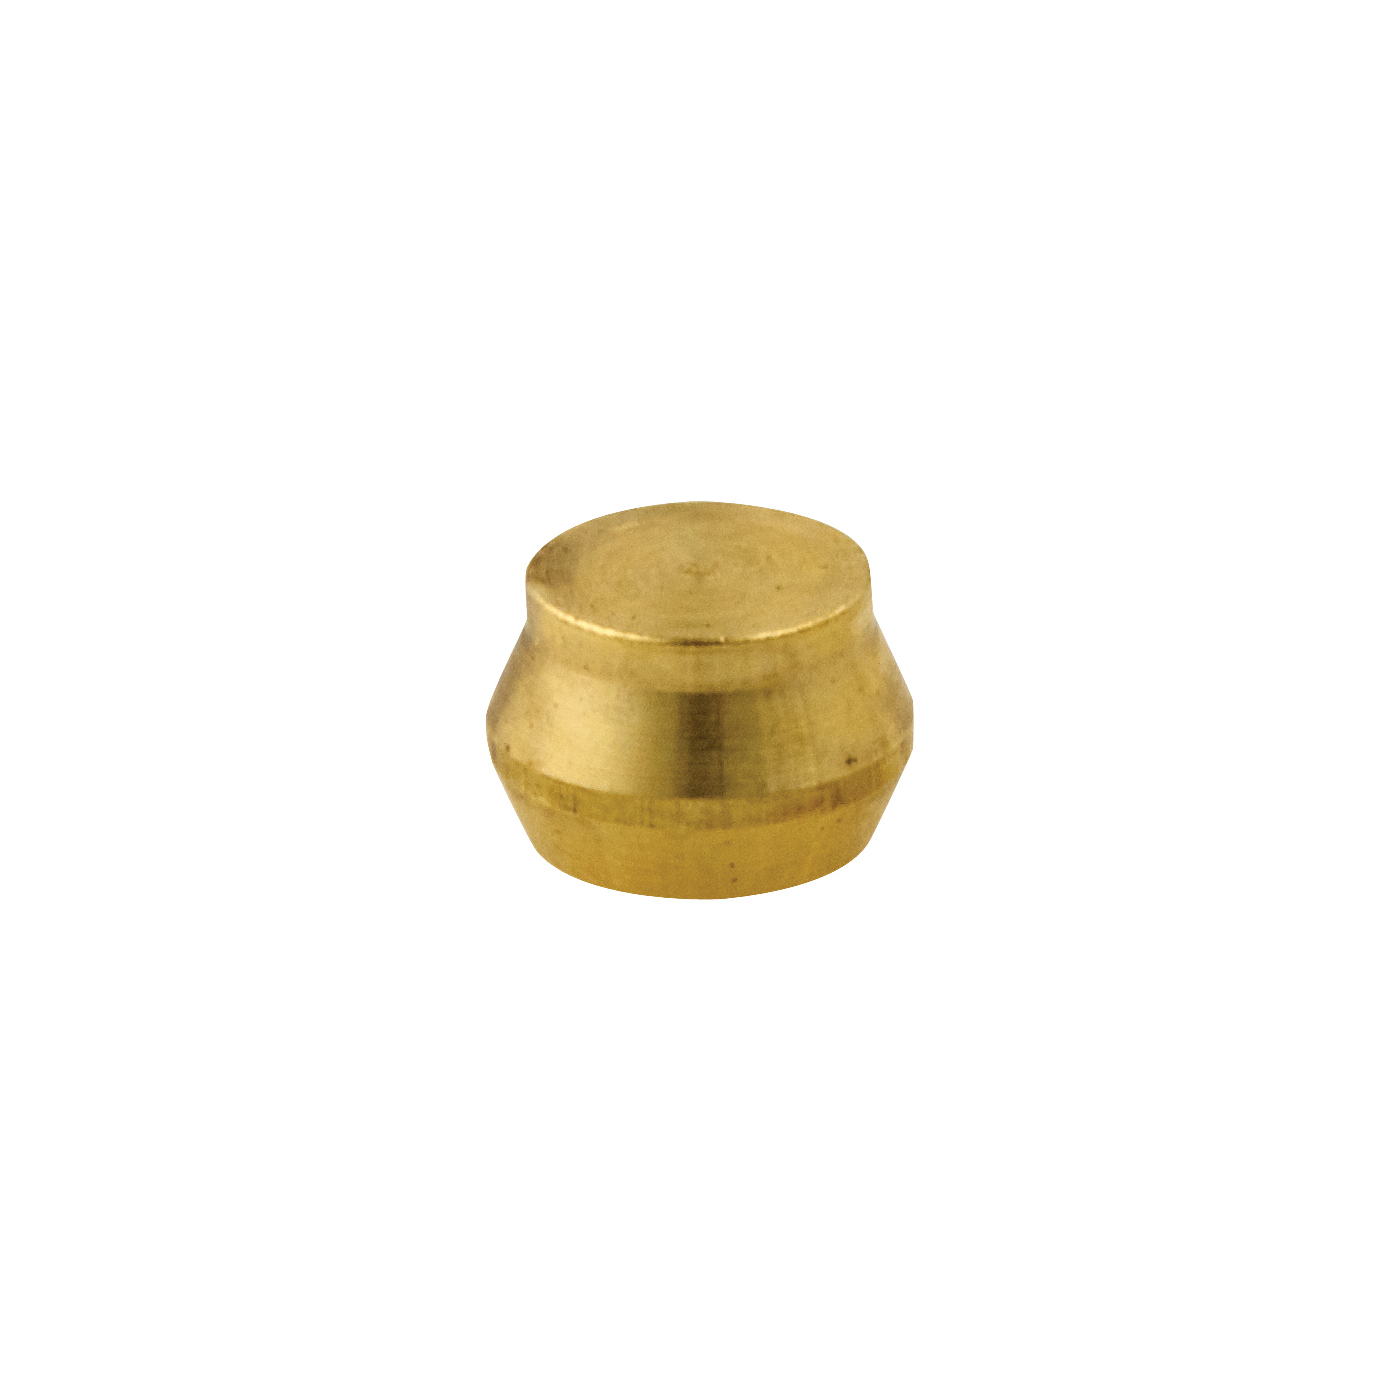 Brass t assembly (3N + 3S) compression pipe fittings for plumbing, oil